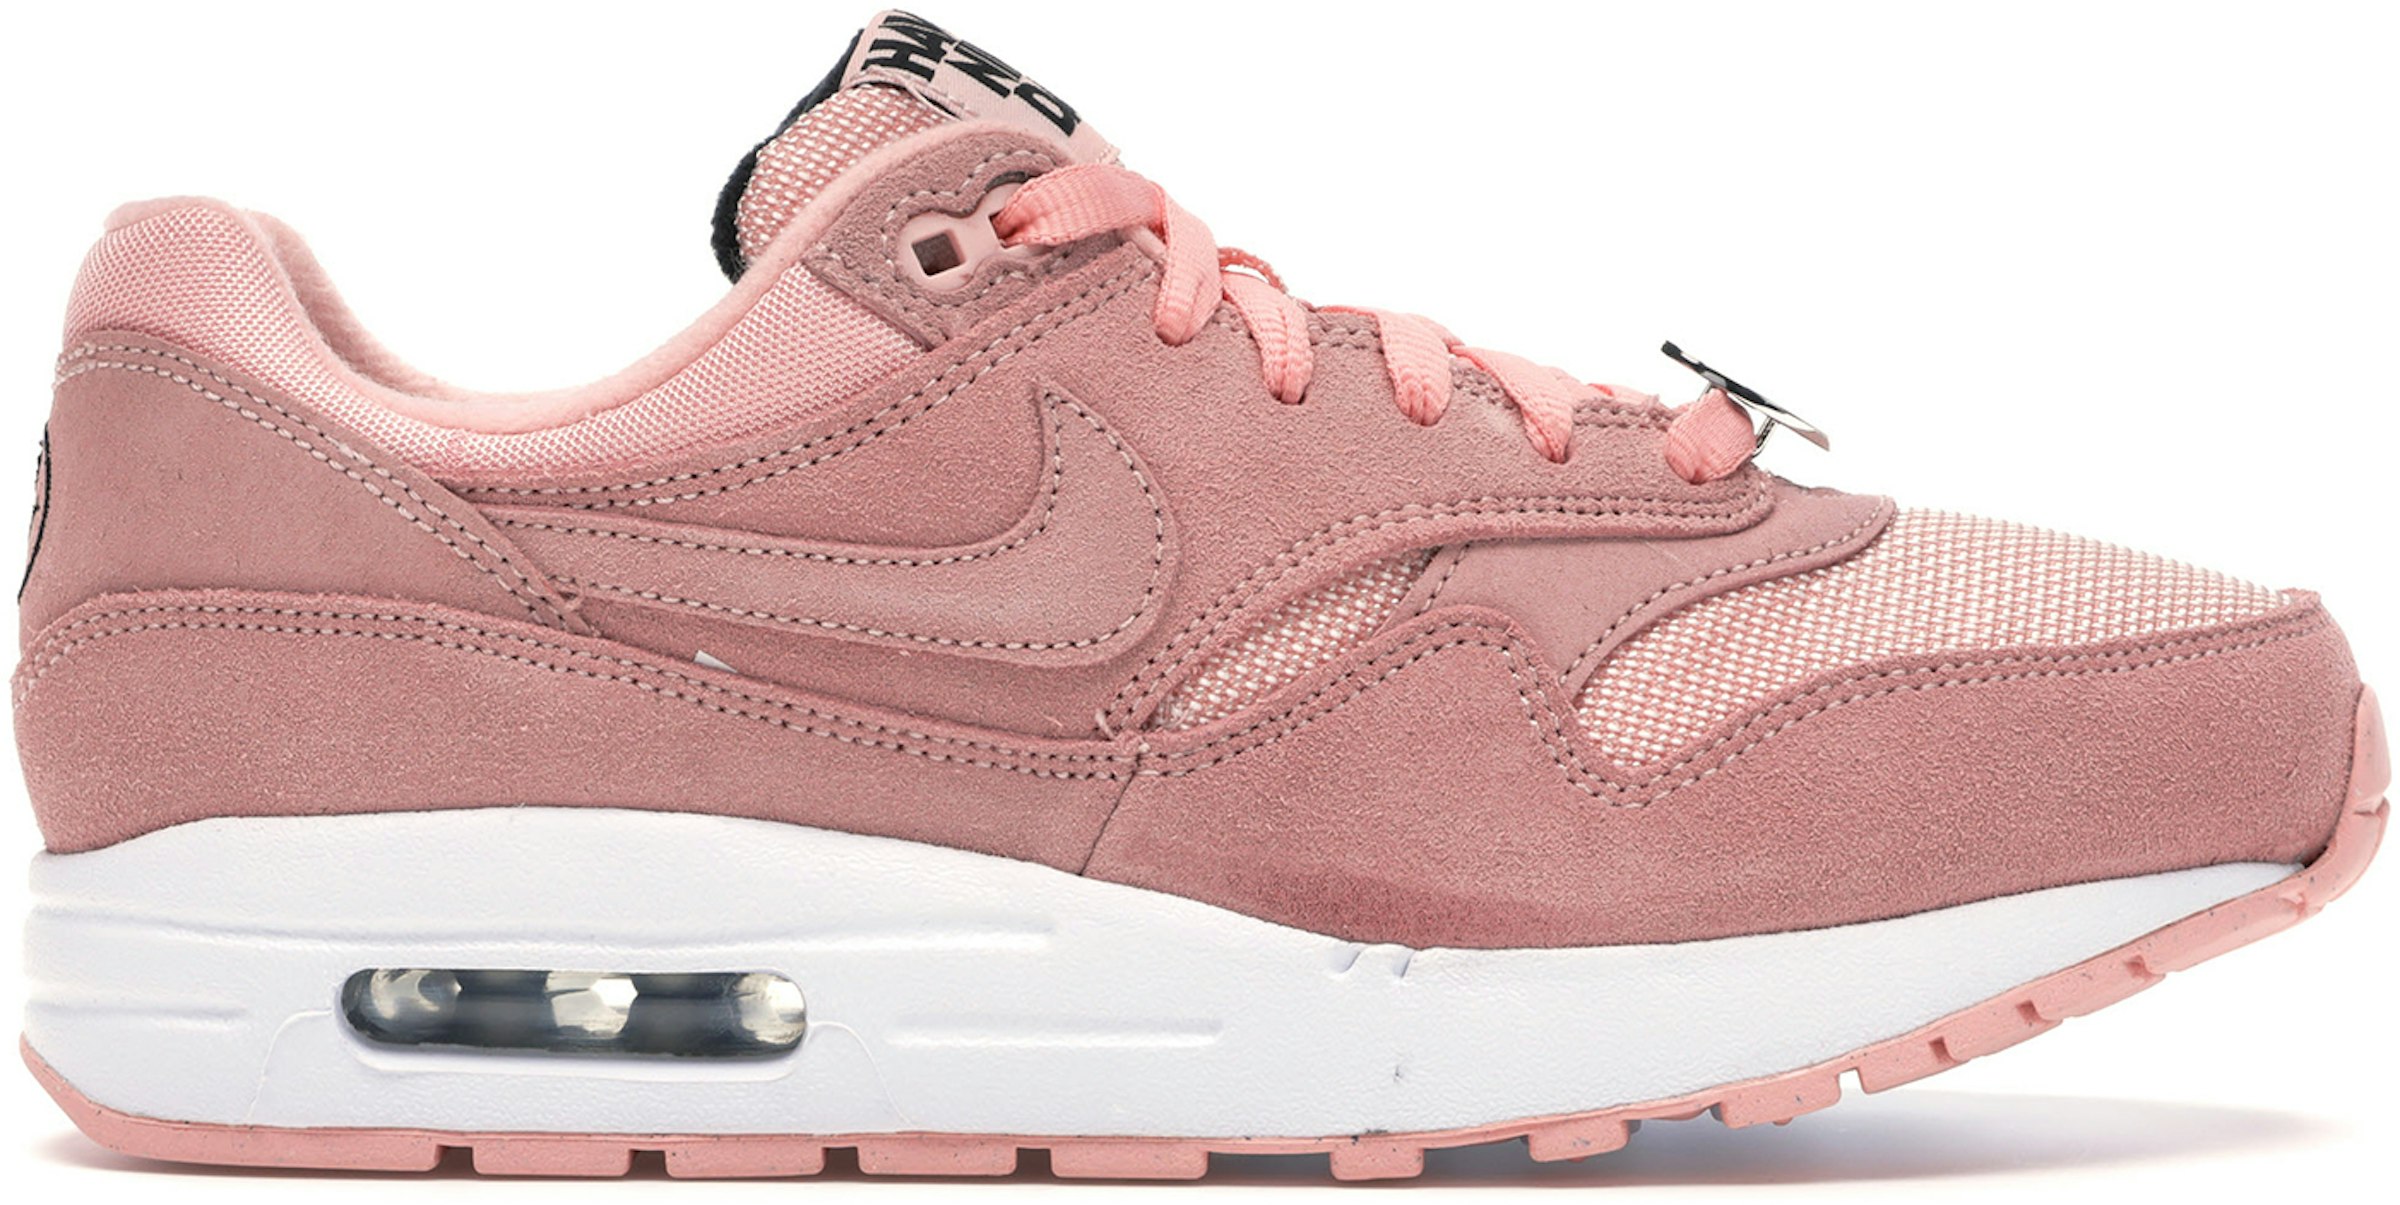 Mujer hermosa Ejemplo R Nike Air Max 1 Have a Nike Day Bleached Coral (GS) Kids' - AT8131-600 - US